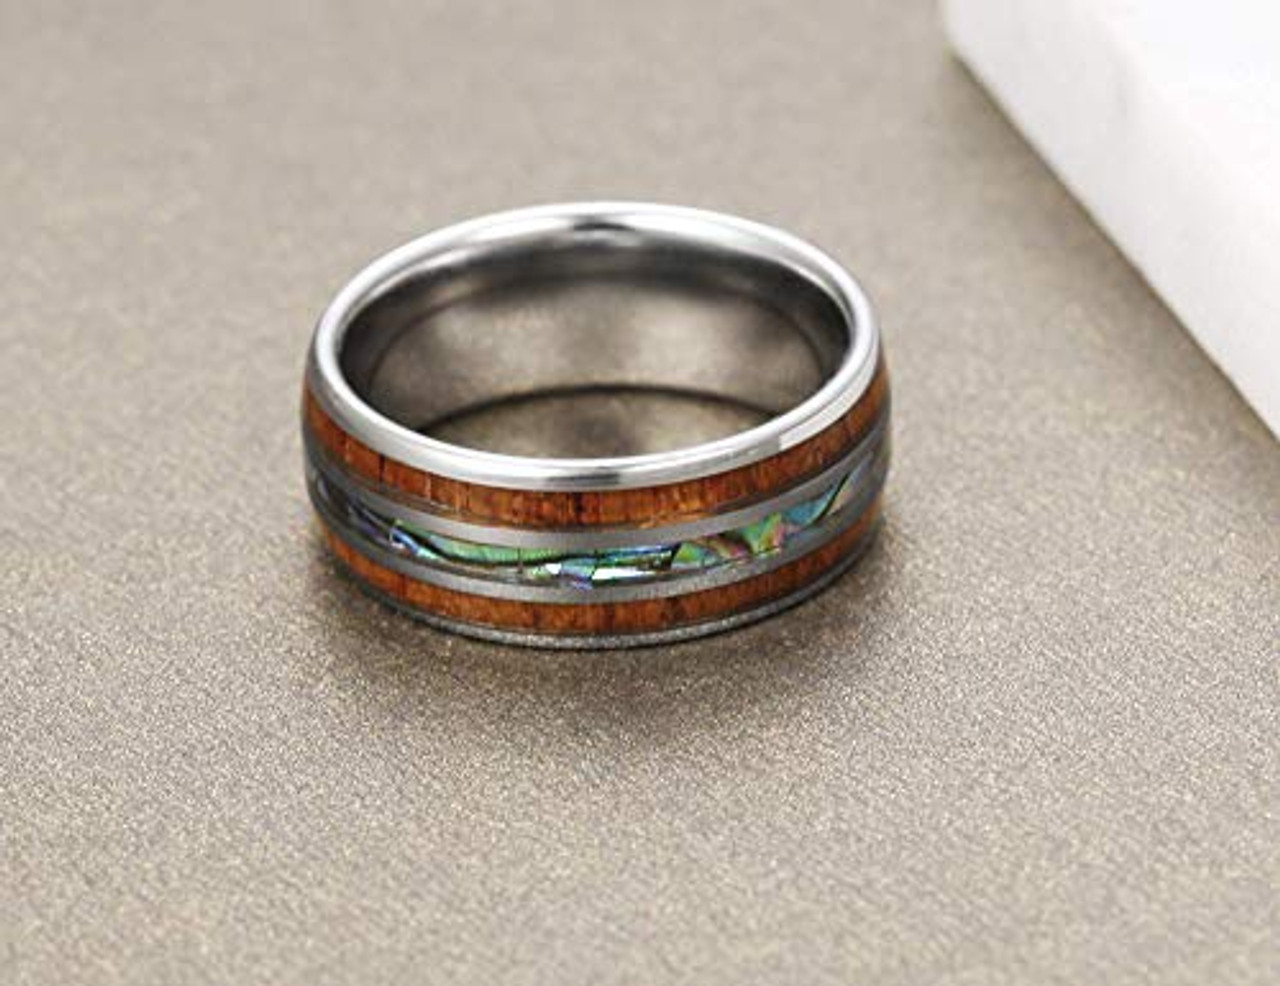 (8mm) Unisex or Men's Tungsten Carbide Wedding ring band - Silver Tone Wood and Rainbow Abalone Shell Inlay Ring. 